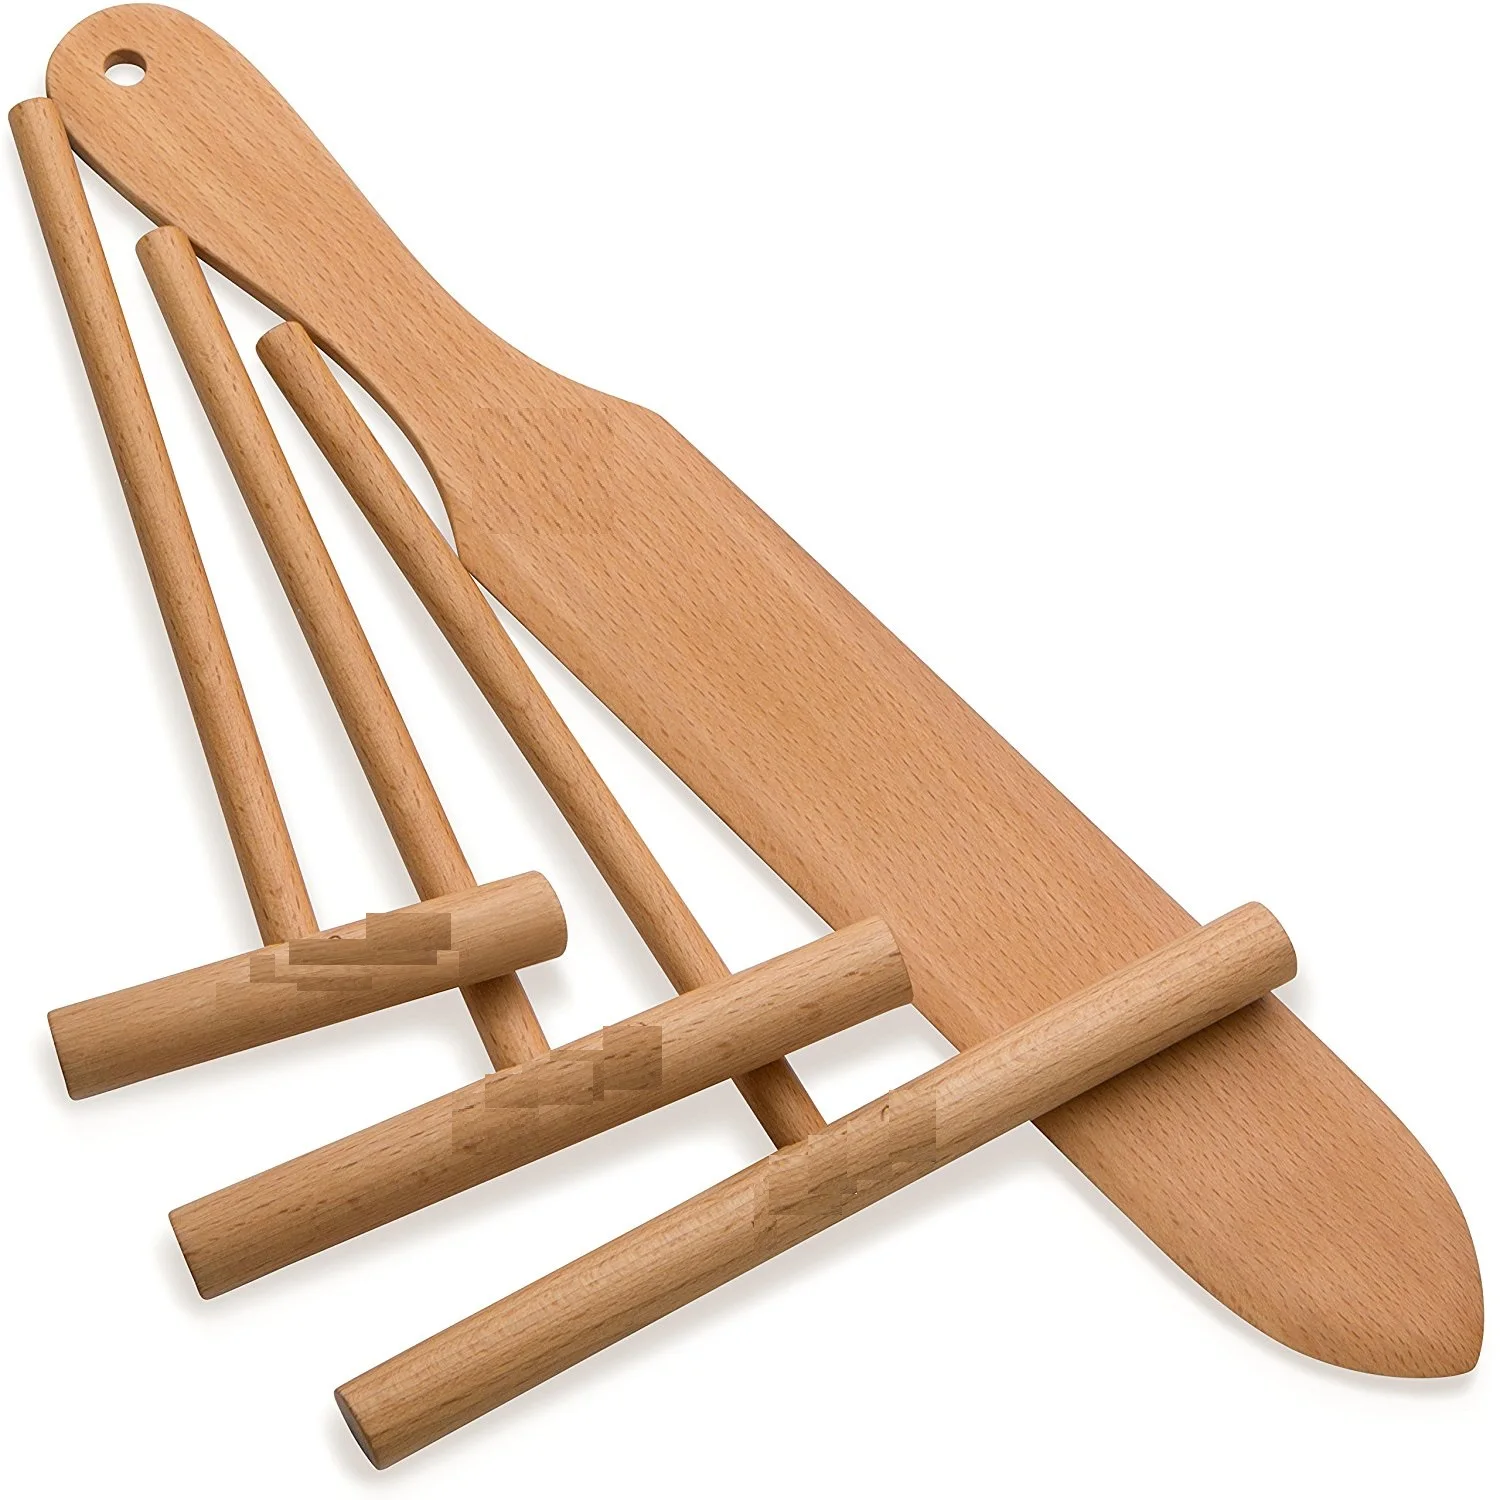 L Perfect Size to Fit Medium Crepe Pan 100% Natural Beechwood Crepe Spreader and Spatula for Cooking Wooden Crepe Spatula and spreaders| Wooden Spatula Set 